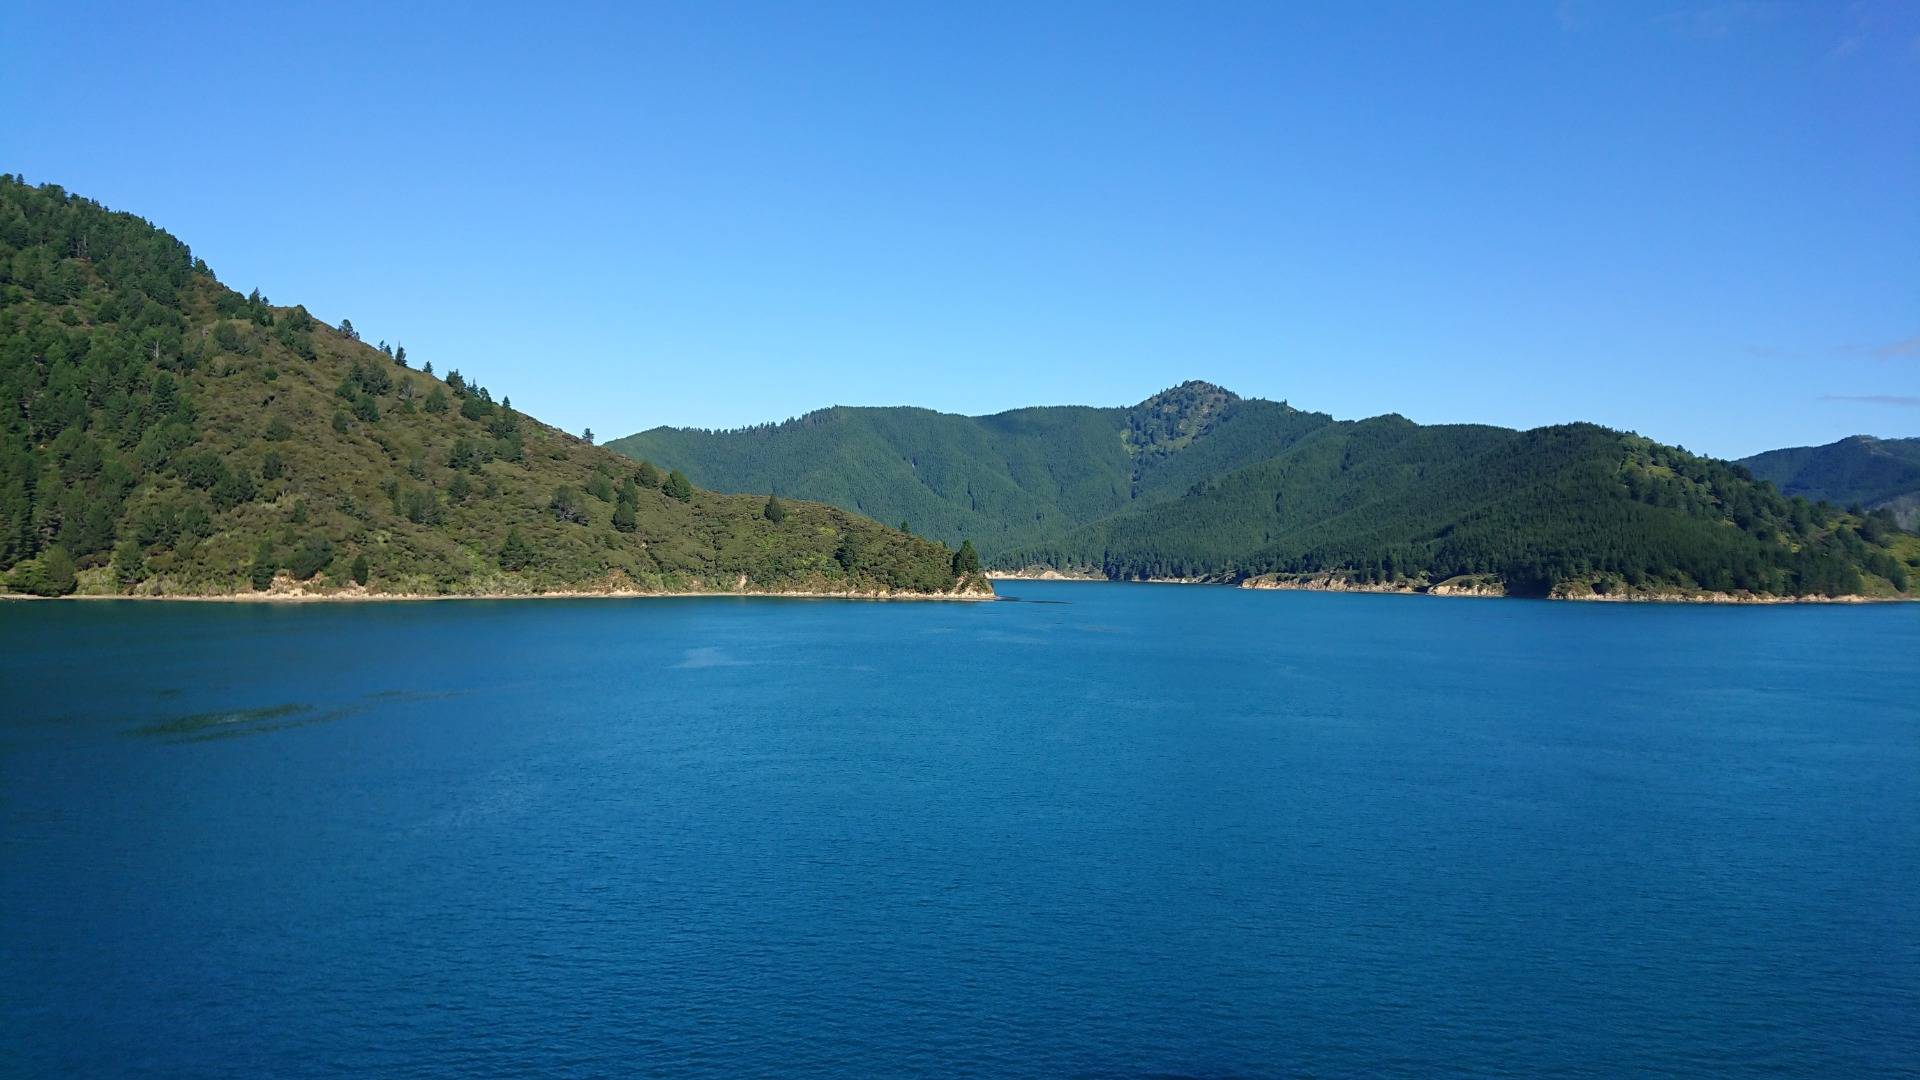 The skies cleared as the ferry entered the Marlborough Sounds...